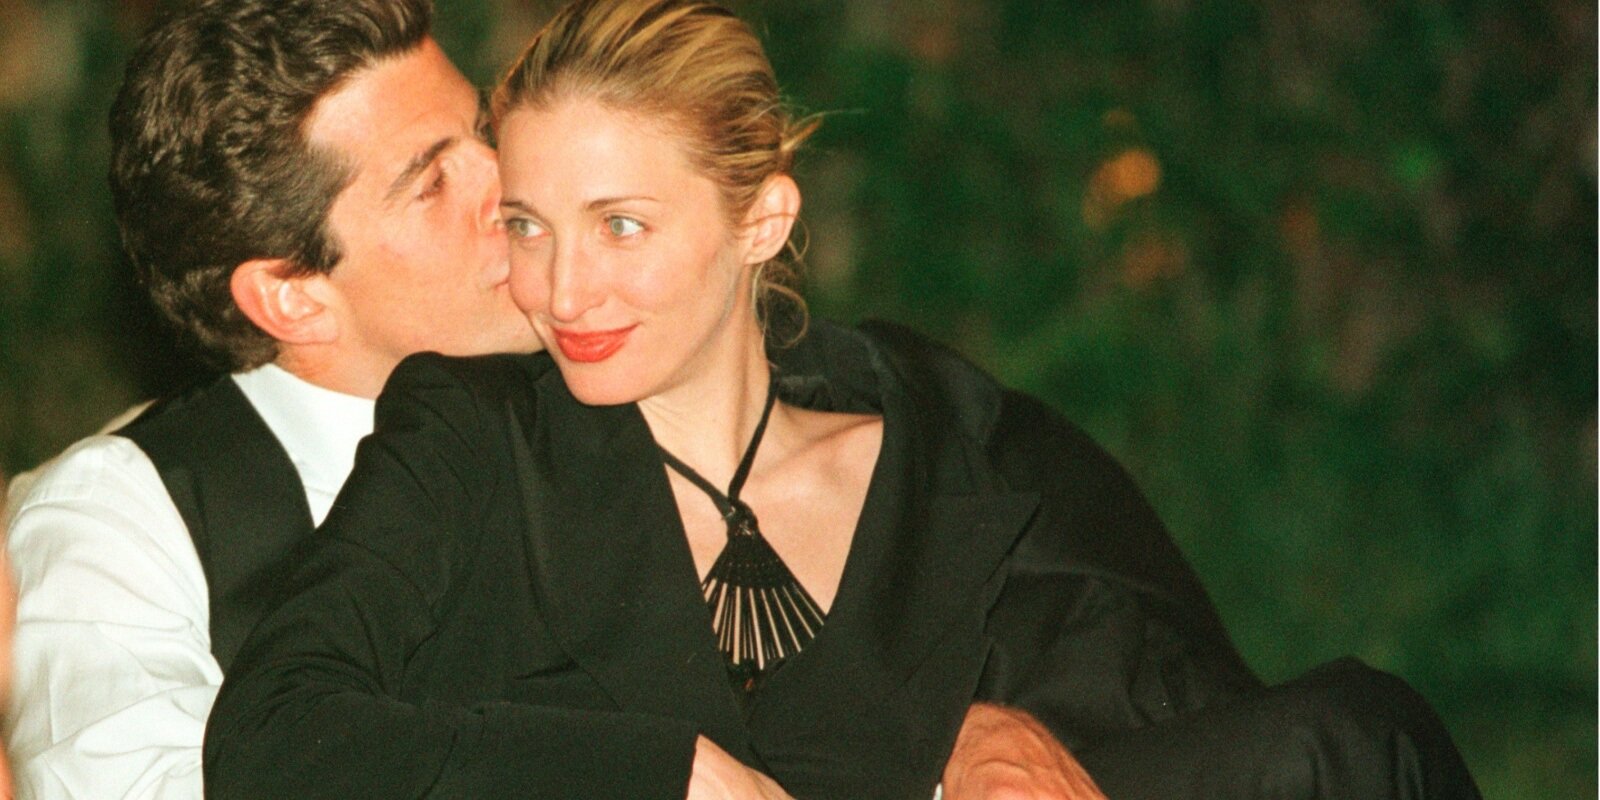 John F. Kennedy Jr.'s Death and Romance With Carolyn Bessette Kennedy ...